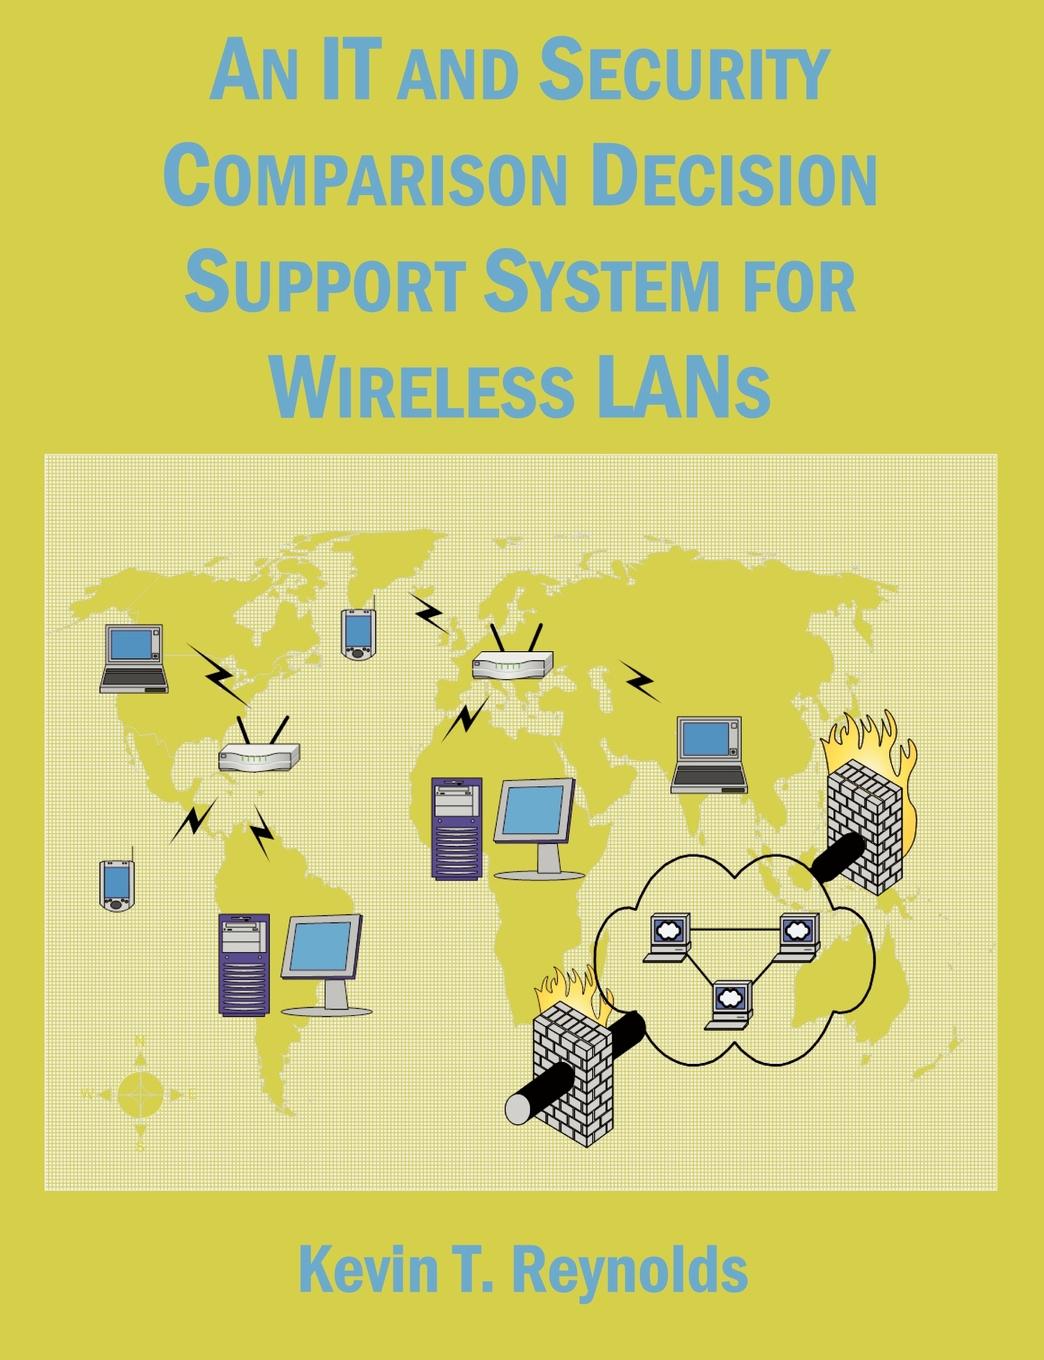 An IT and Security Comparison Decision Support System for Wireless LANs. 802.11 infosec and WiFi LAN comparison